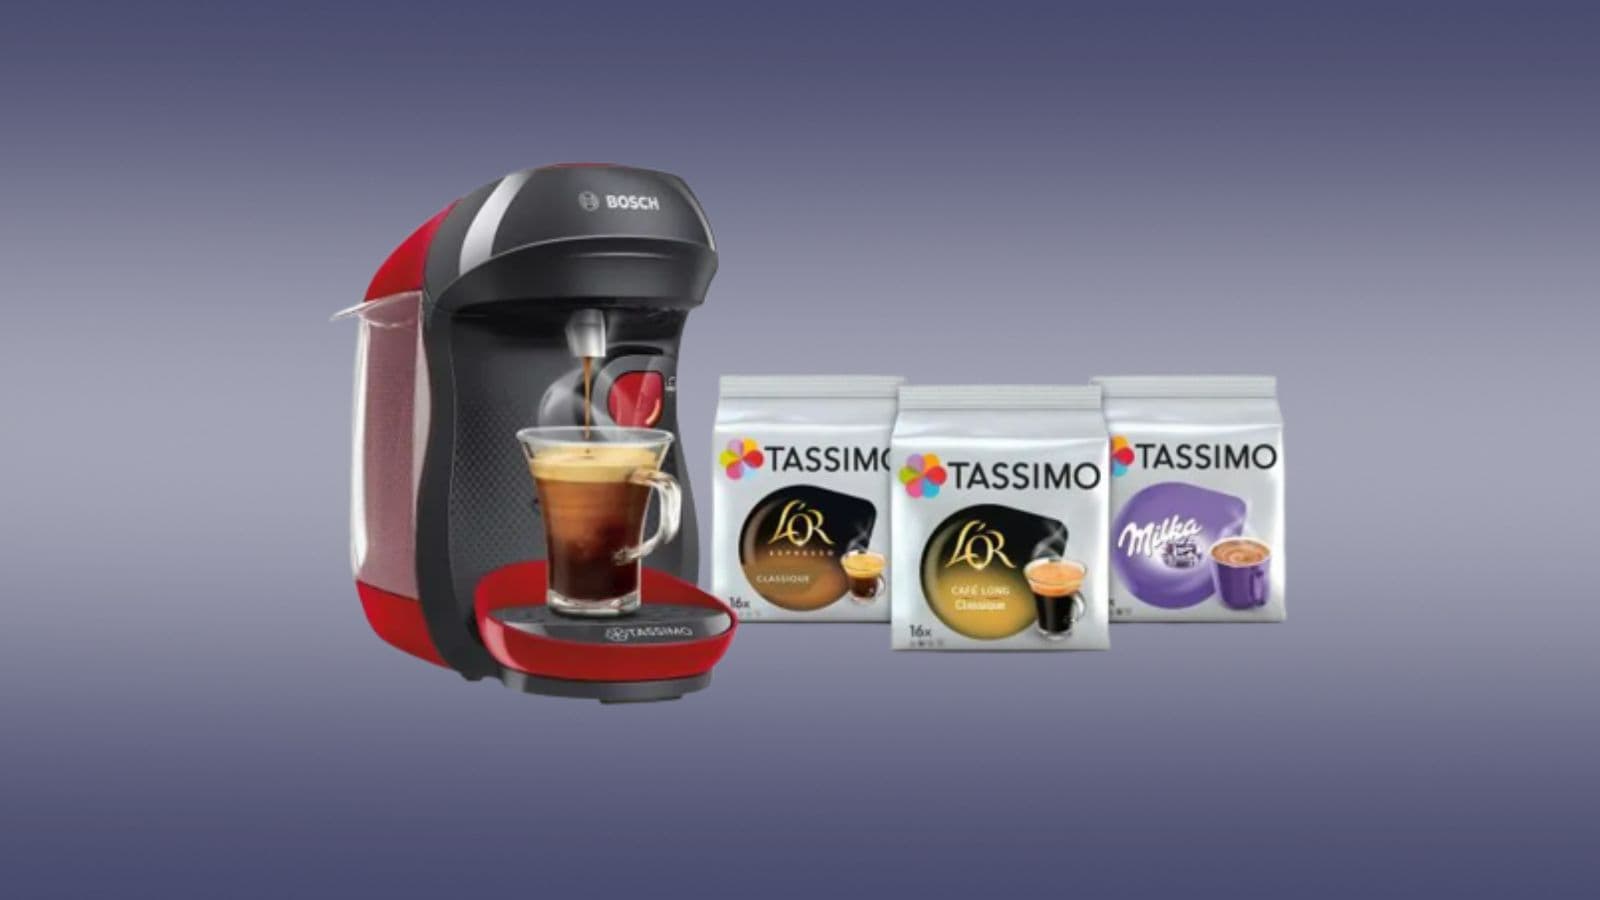 T-Disc Tassimo pour Cafetiere - Expresso BOSCH - Cdiscount